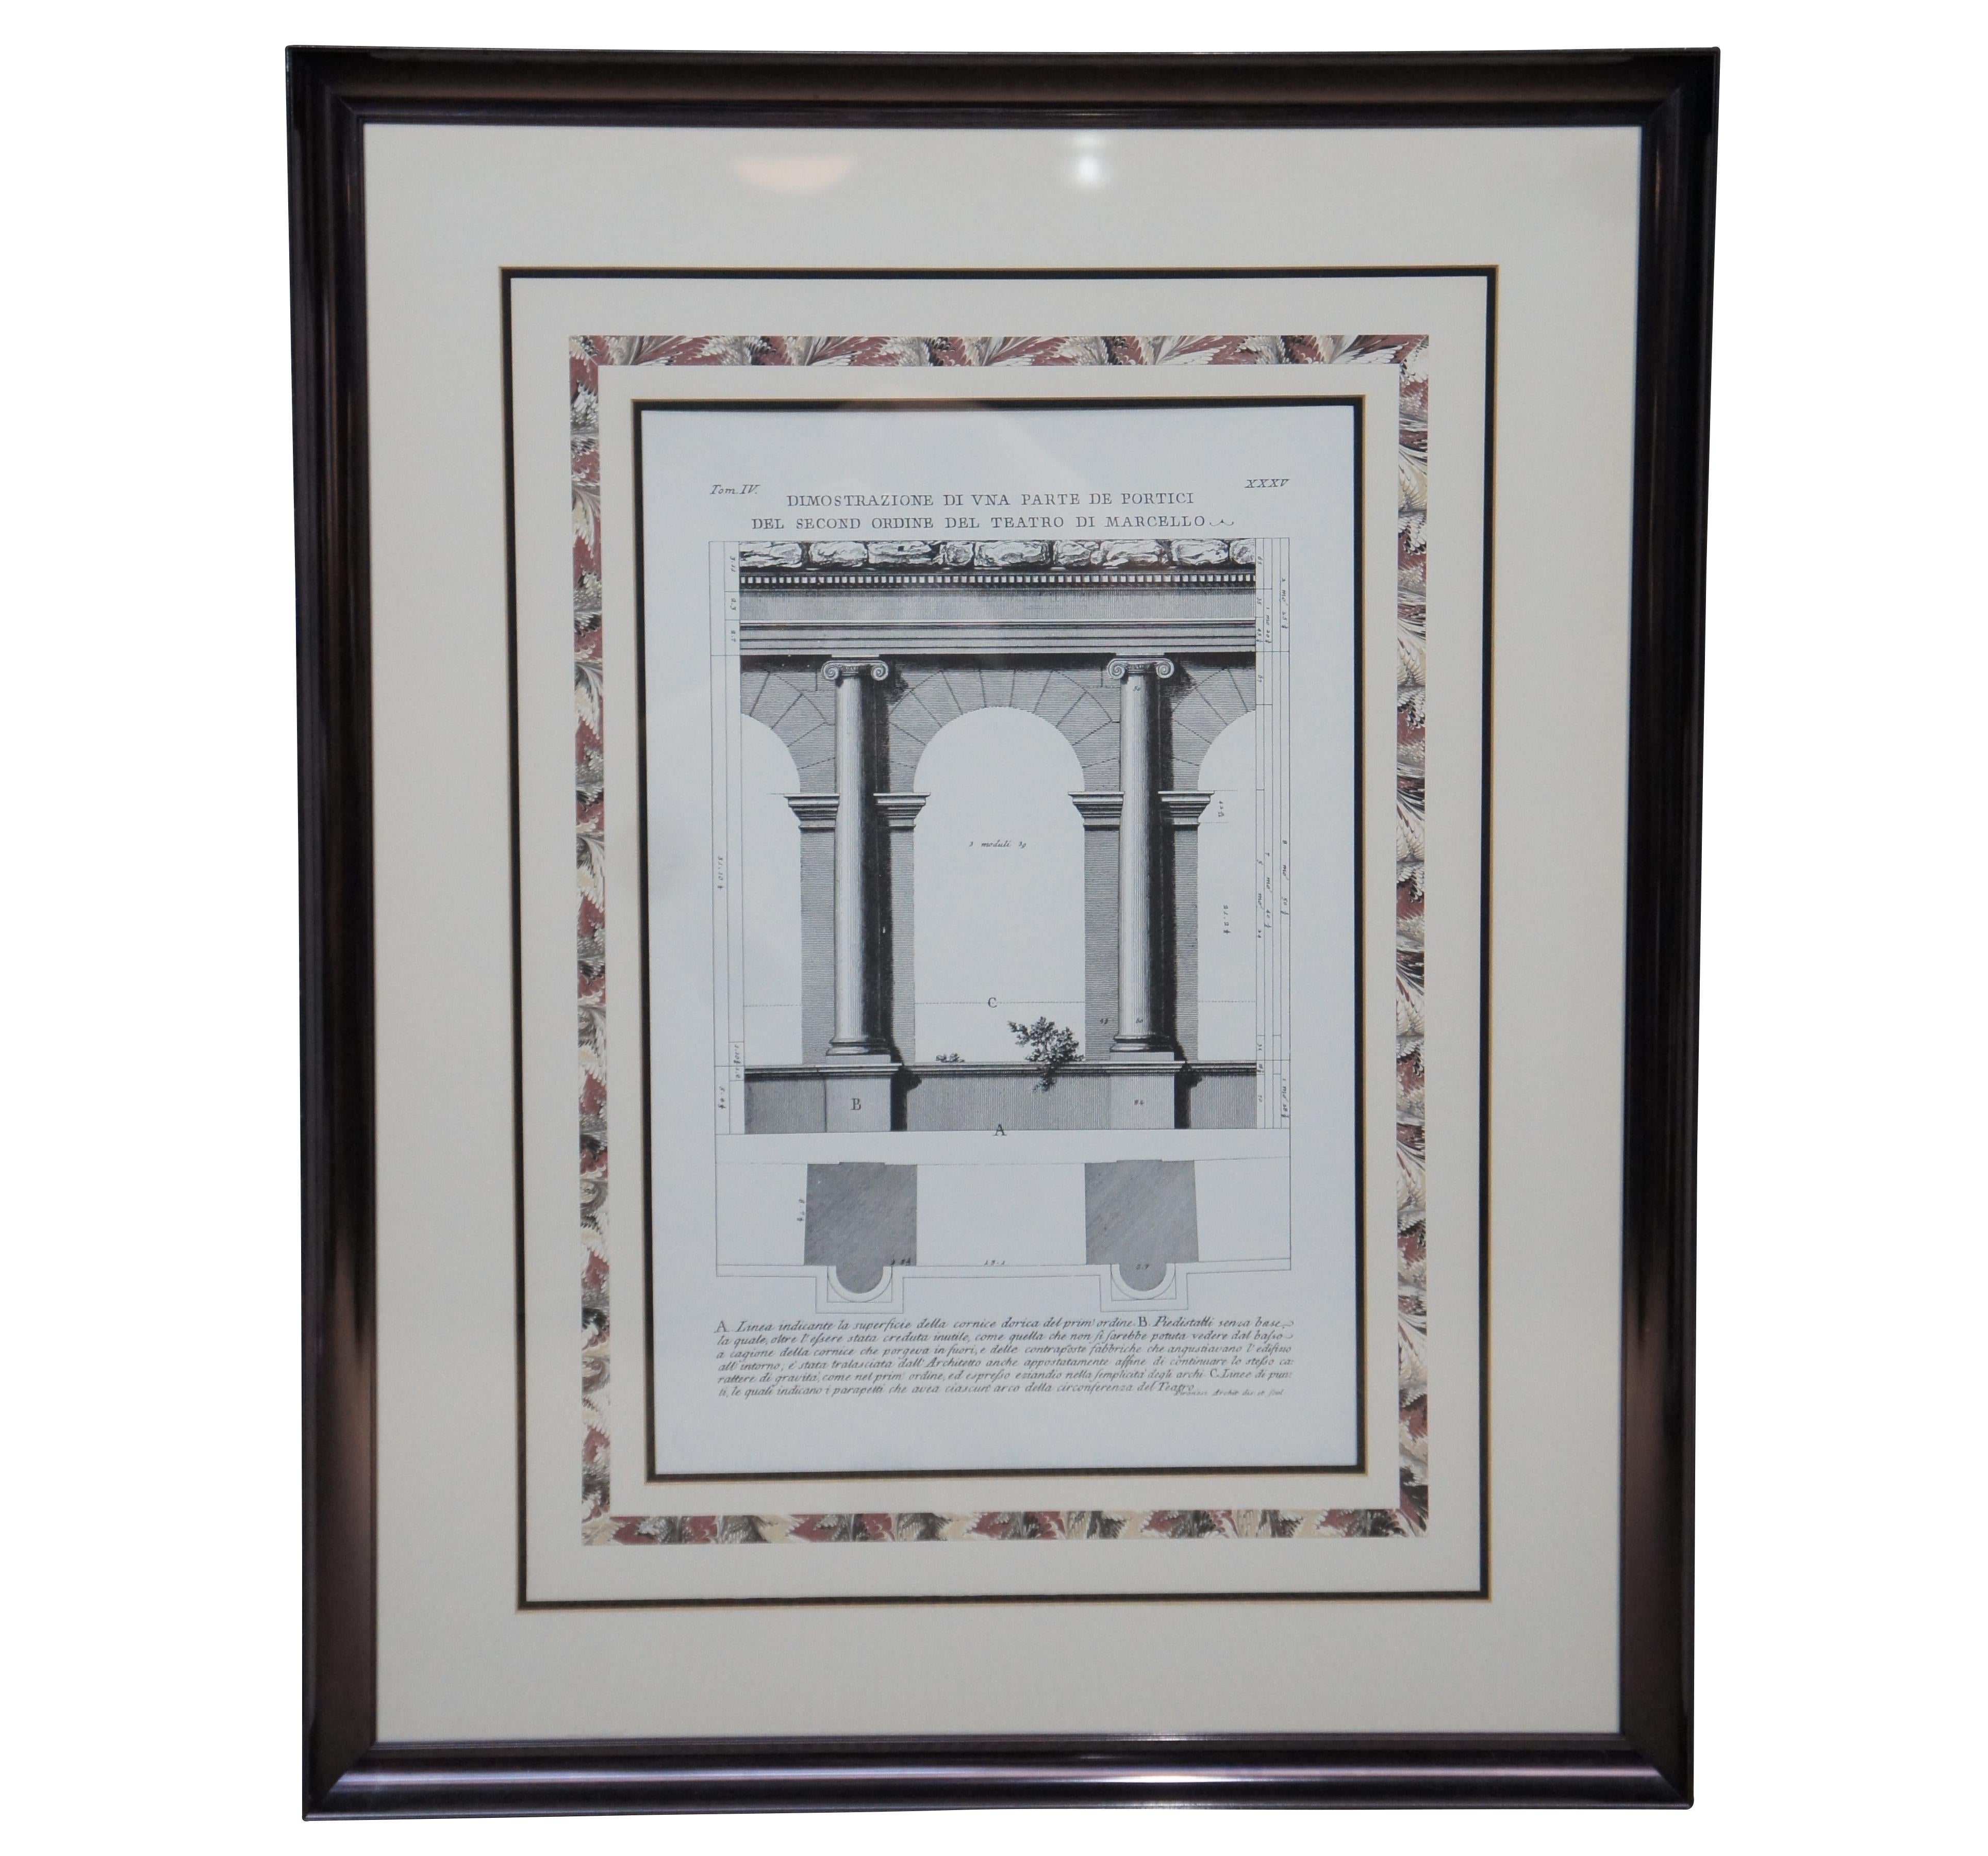 Pair of late 20th century reproduction plate prints of work of Roman Architecture / columns by Giovanni Battista Piranesi – arches and columns from the Theater of Marcellus in Rome. Purchased at Lazarus.

 “Giovanni Battista Piranesi (1720-1778) -